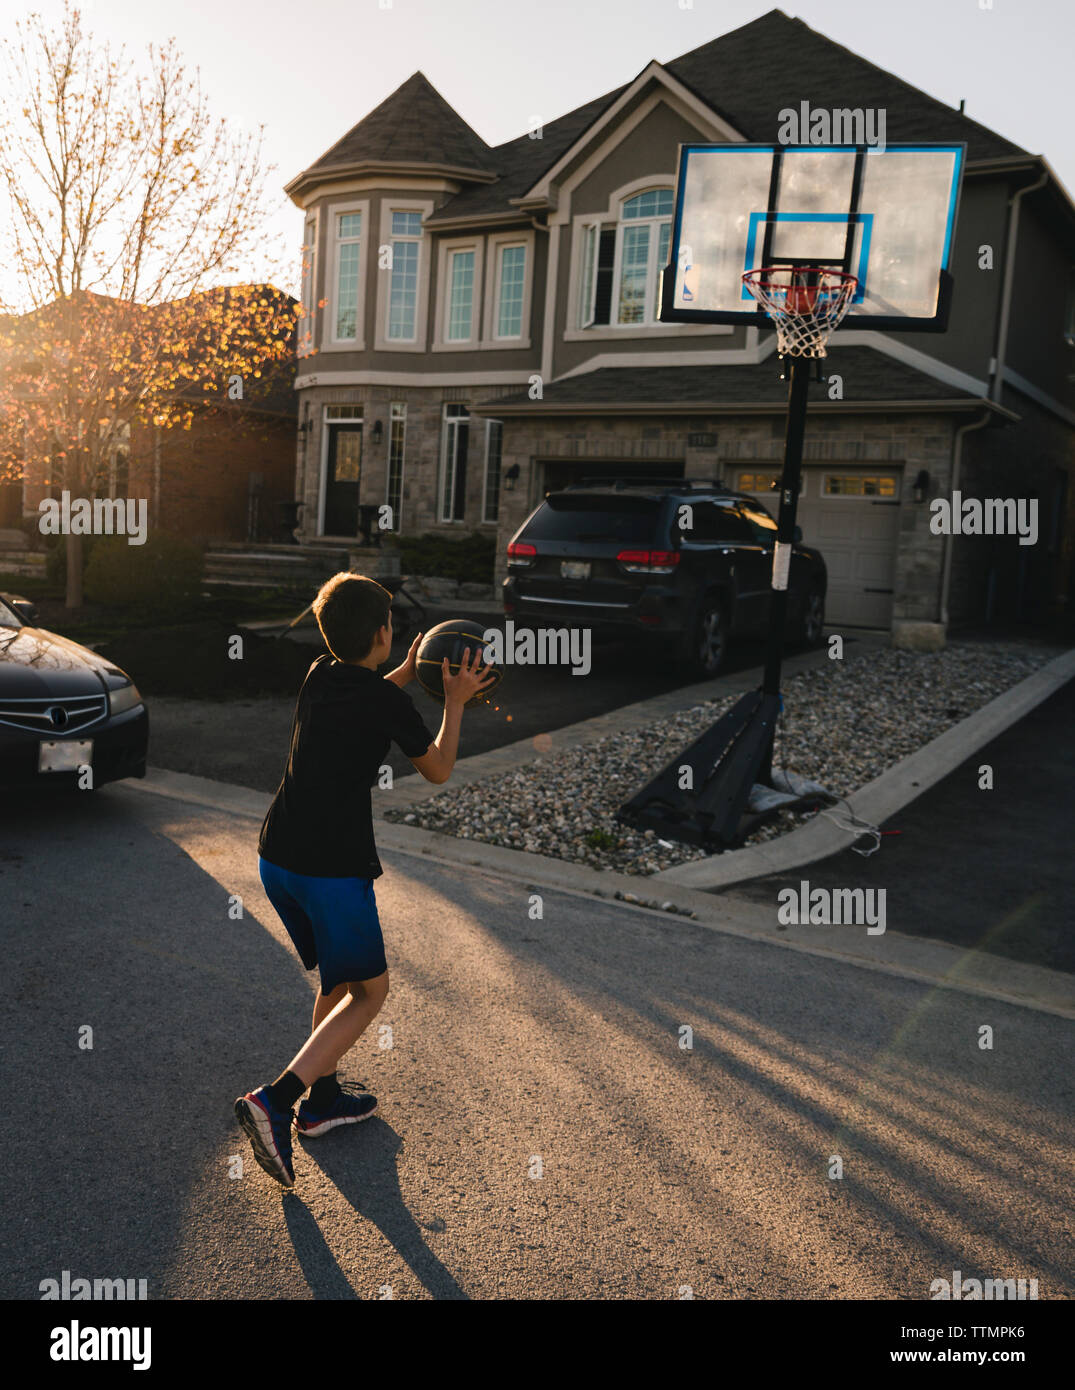 Full length of boy playing basketball on road by house Stock Photo